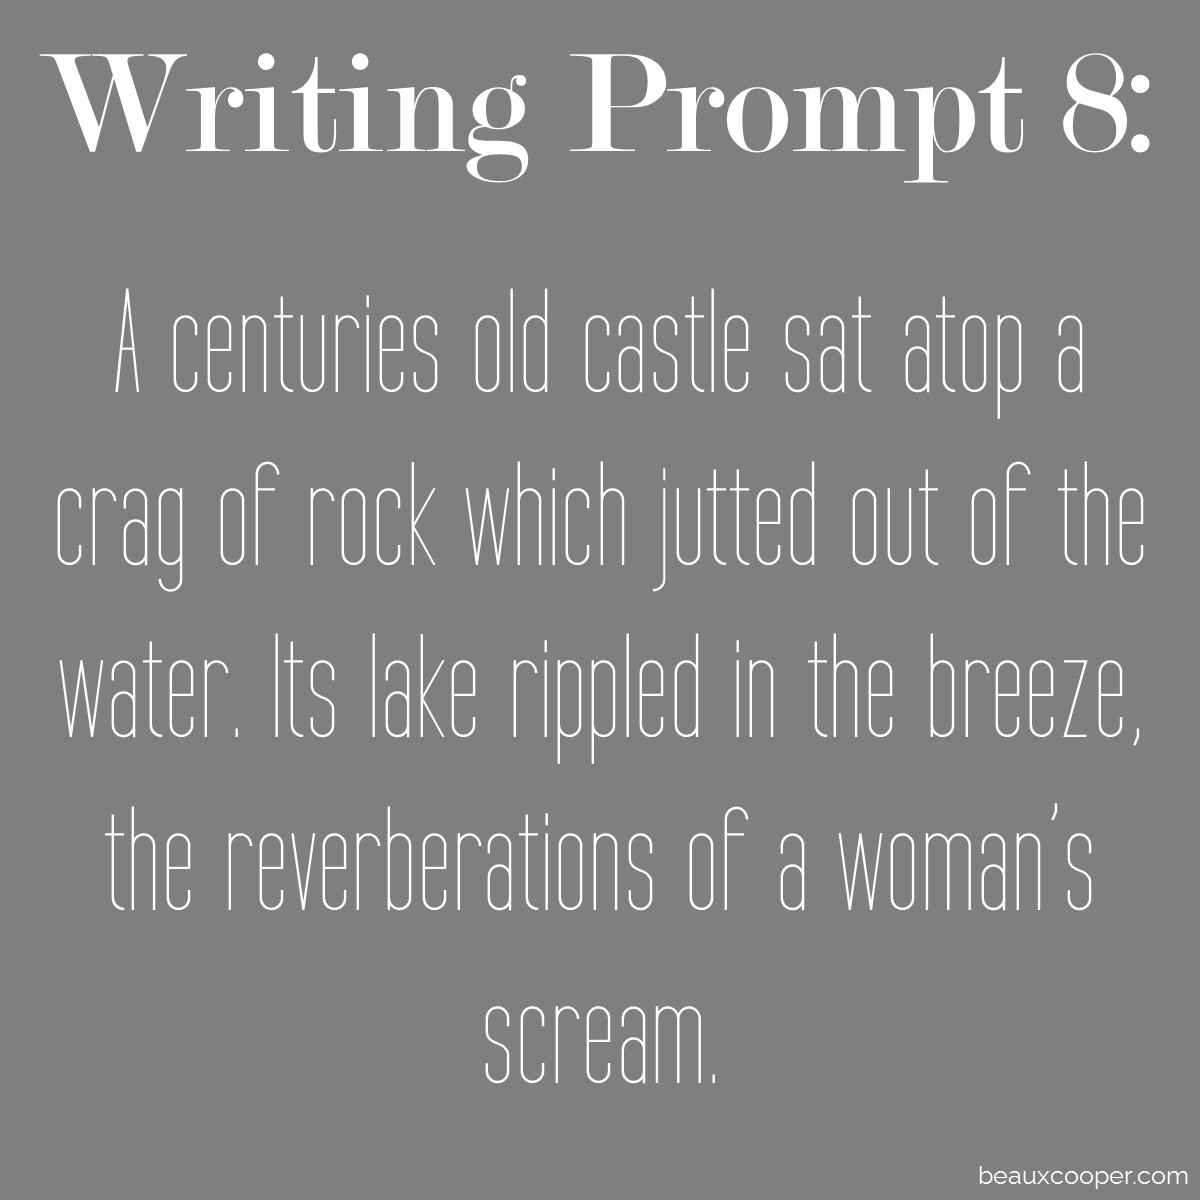 writing-prompt-eight-beaux-cooper